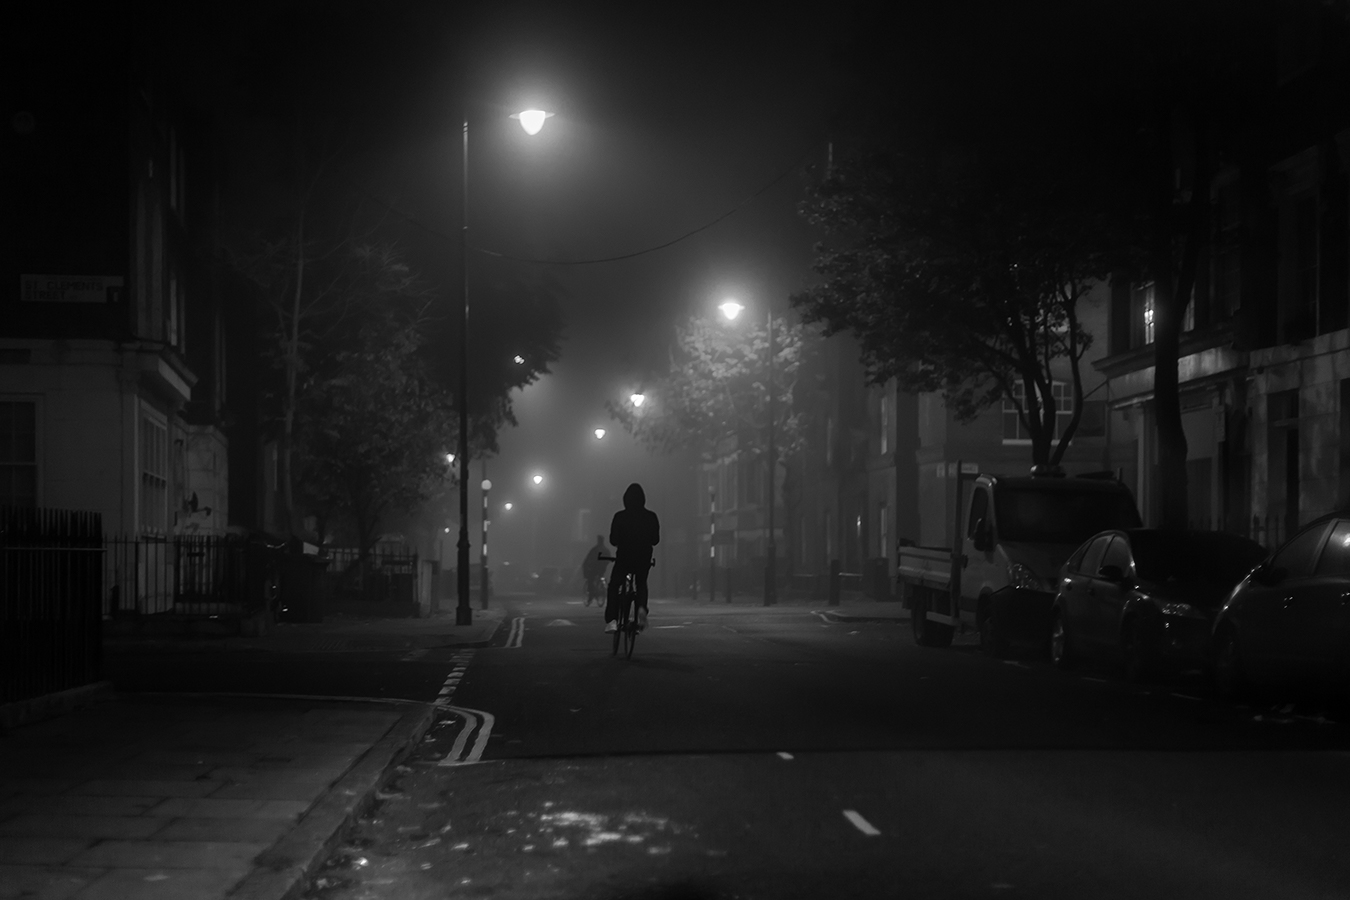 hooded person riding a bike in london at night